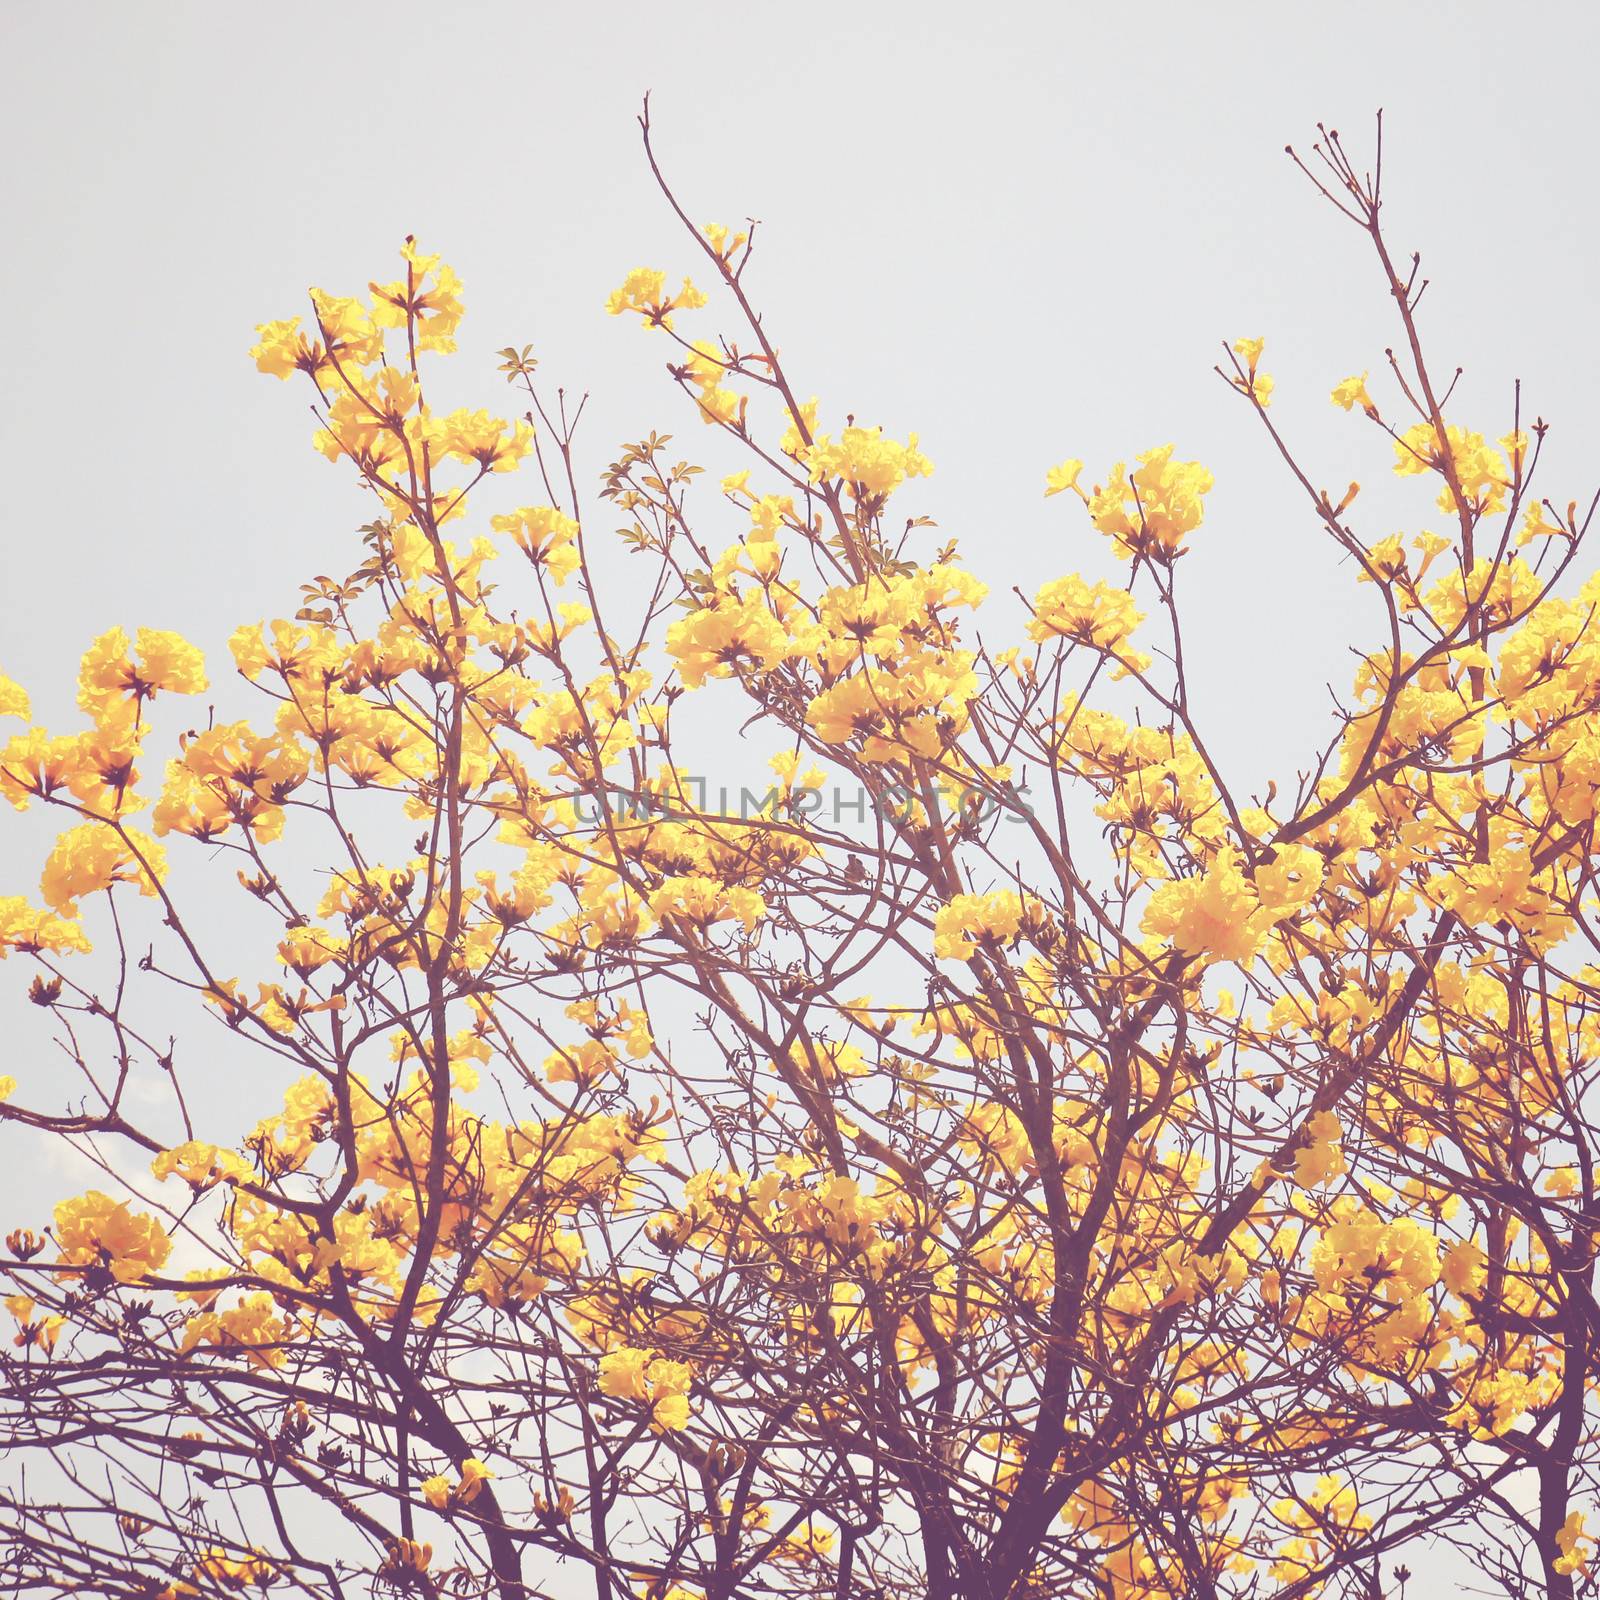 Yellow flower on the top of tree with retro filter effect  by nuchylee